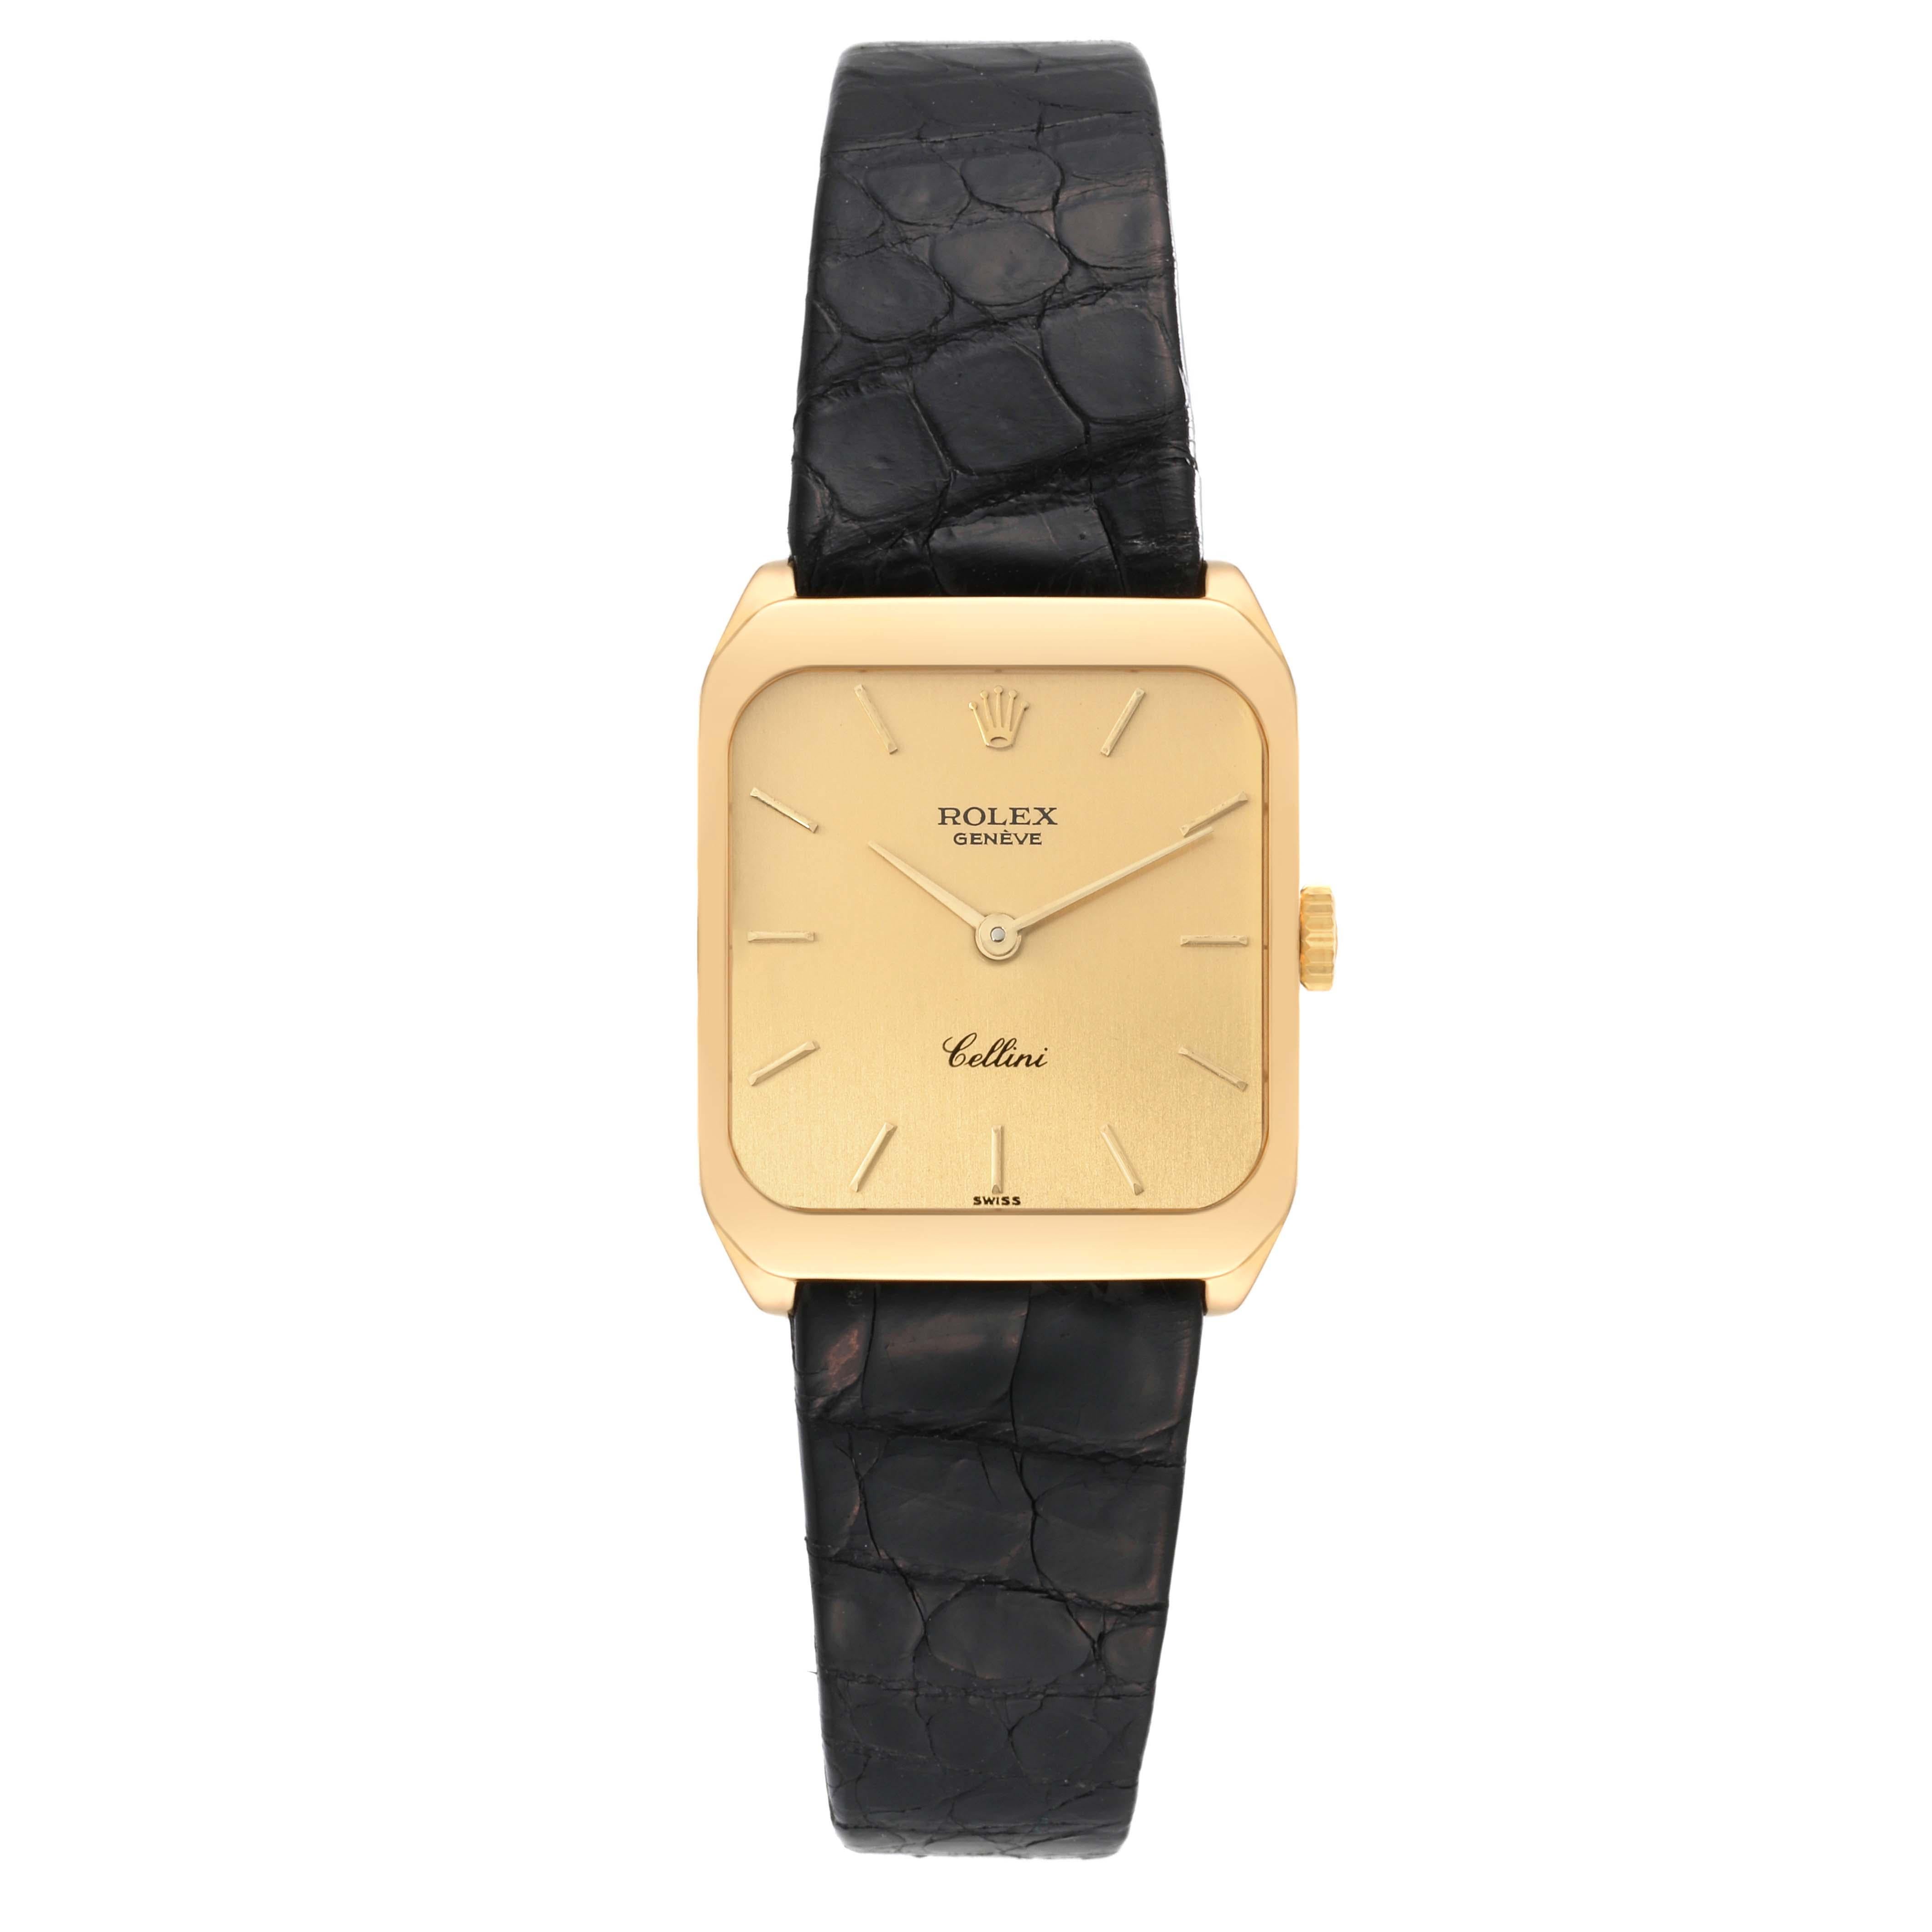 Rolex Cellini Yellow Gold Champagne Dial Mens Vintage Watch 4131 Papers. Manual winding movement. 18k yellow gold rectangular case 24 x 26.5 mm. Rolex logo on the crown. . Acrylic crystal. Champagne dial with raised yellow gold baton hour markers